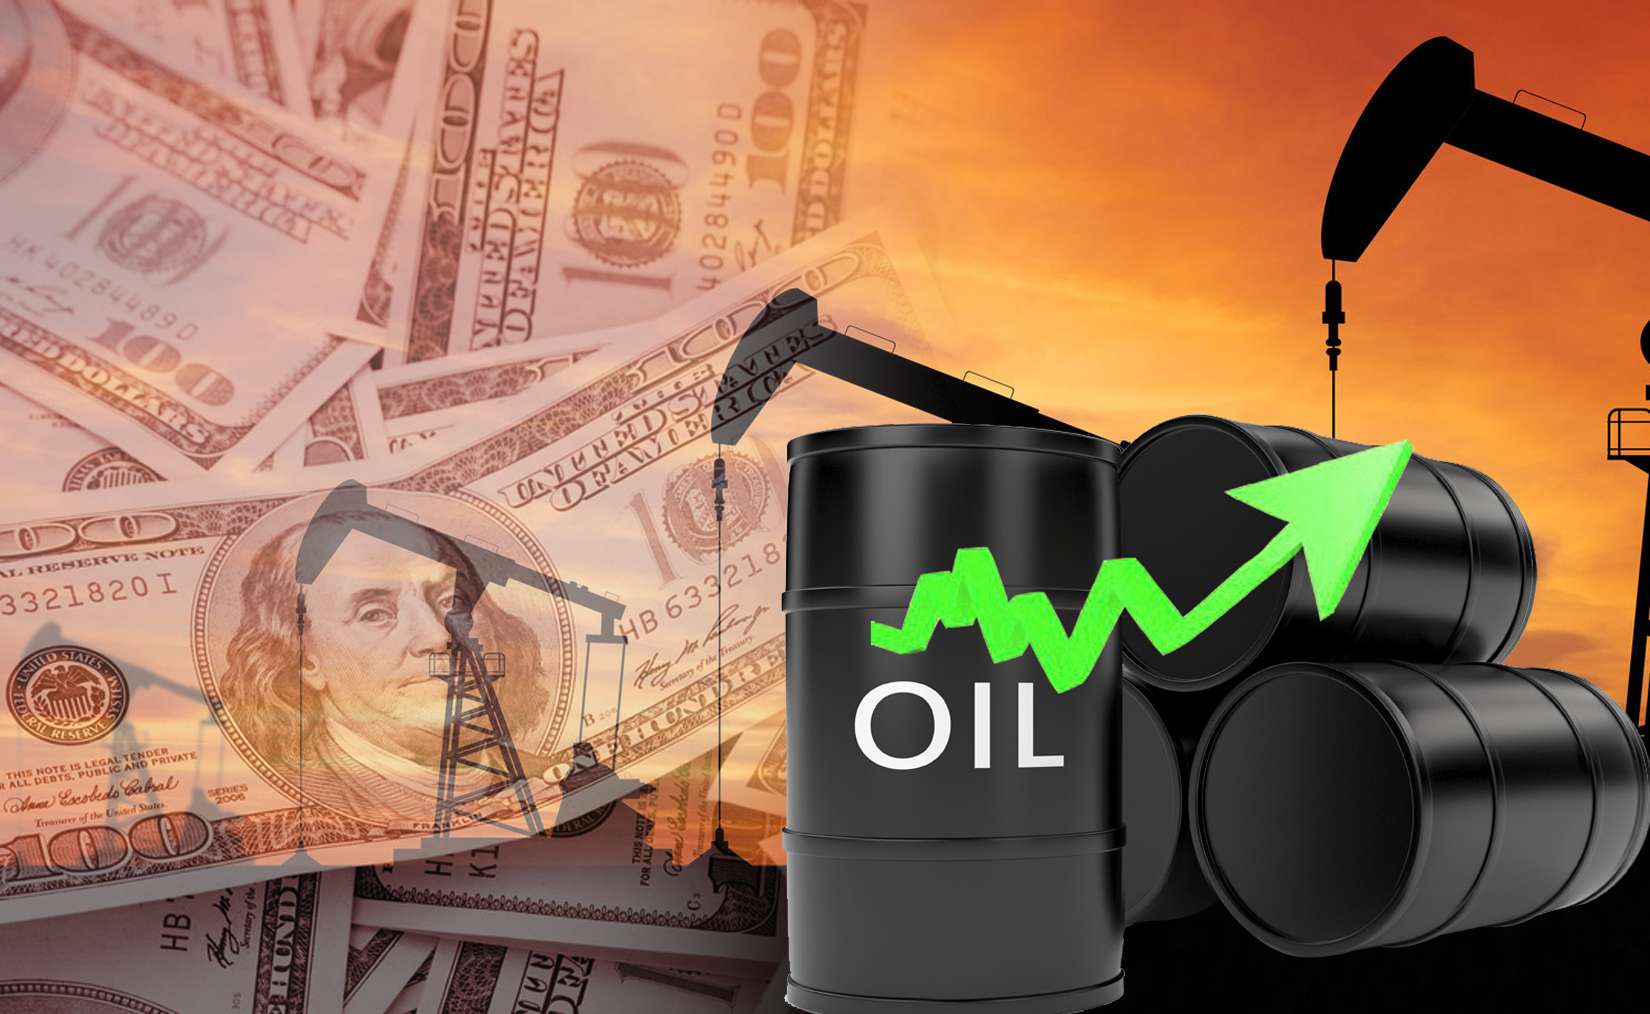 Kuwait oil price up 25 cents to USD 43.86 pb                                                                                                                                                                                                              